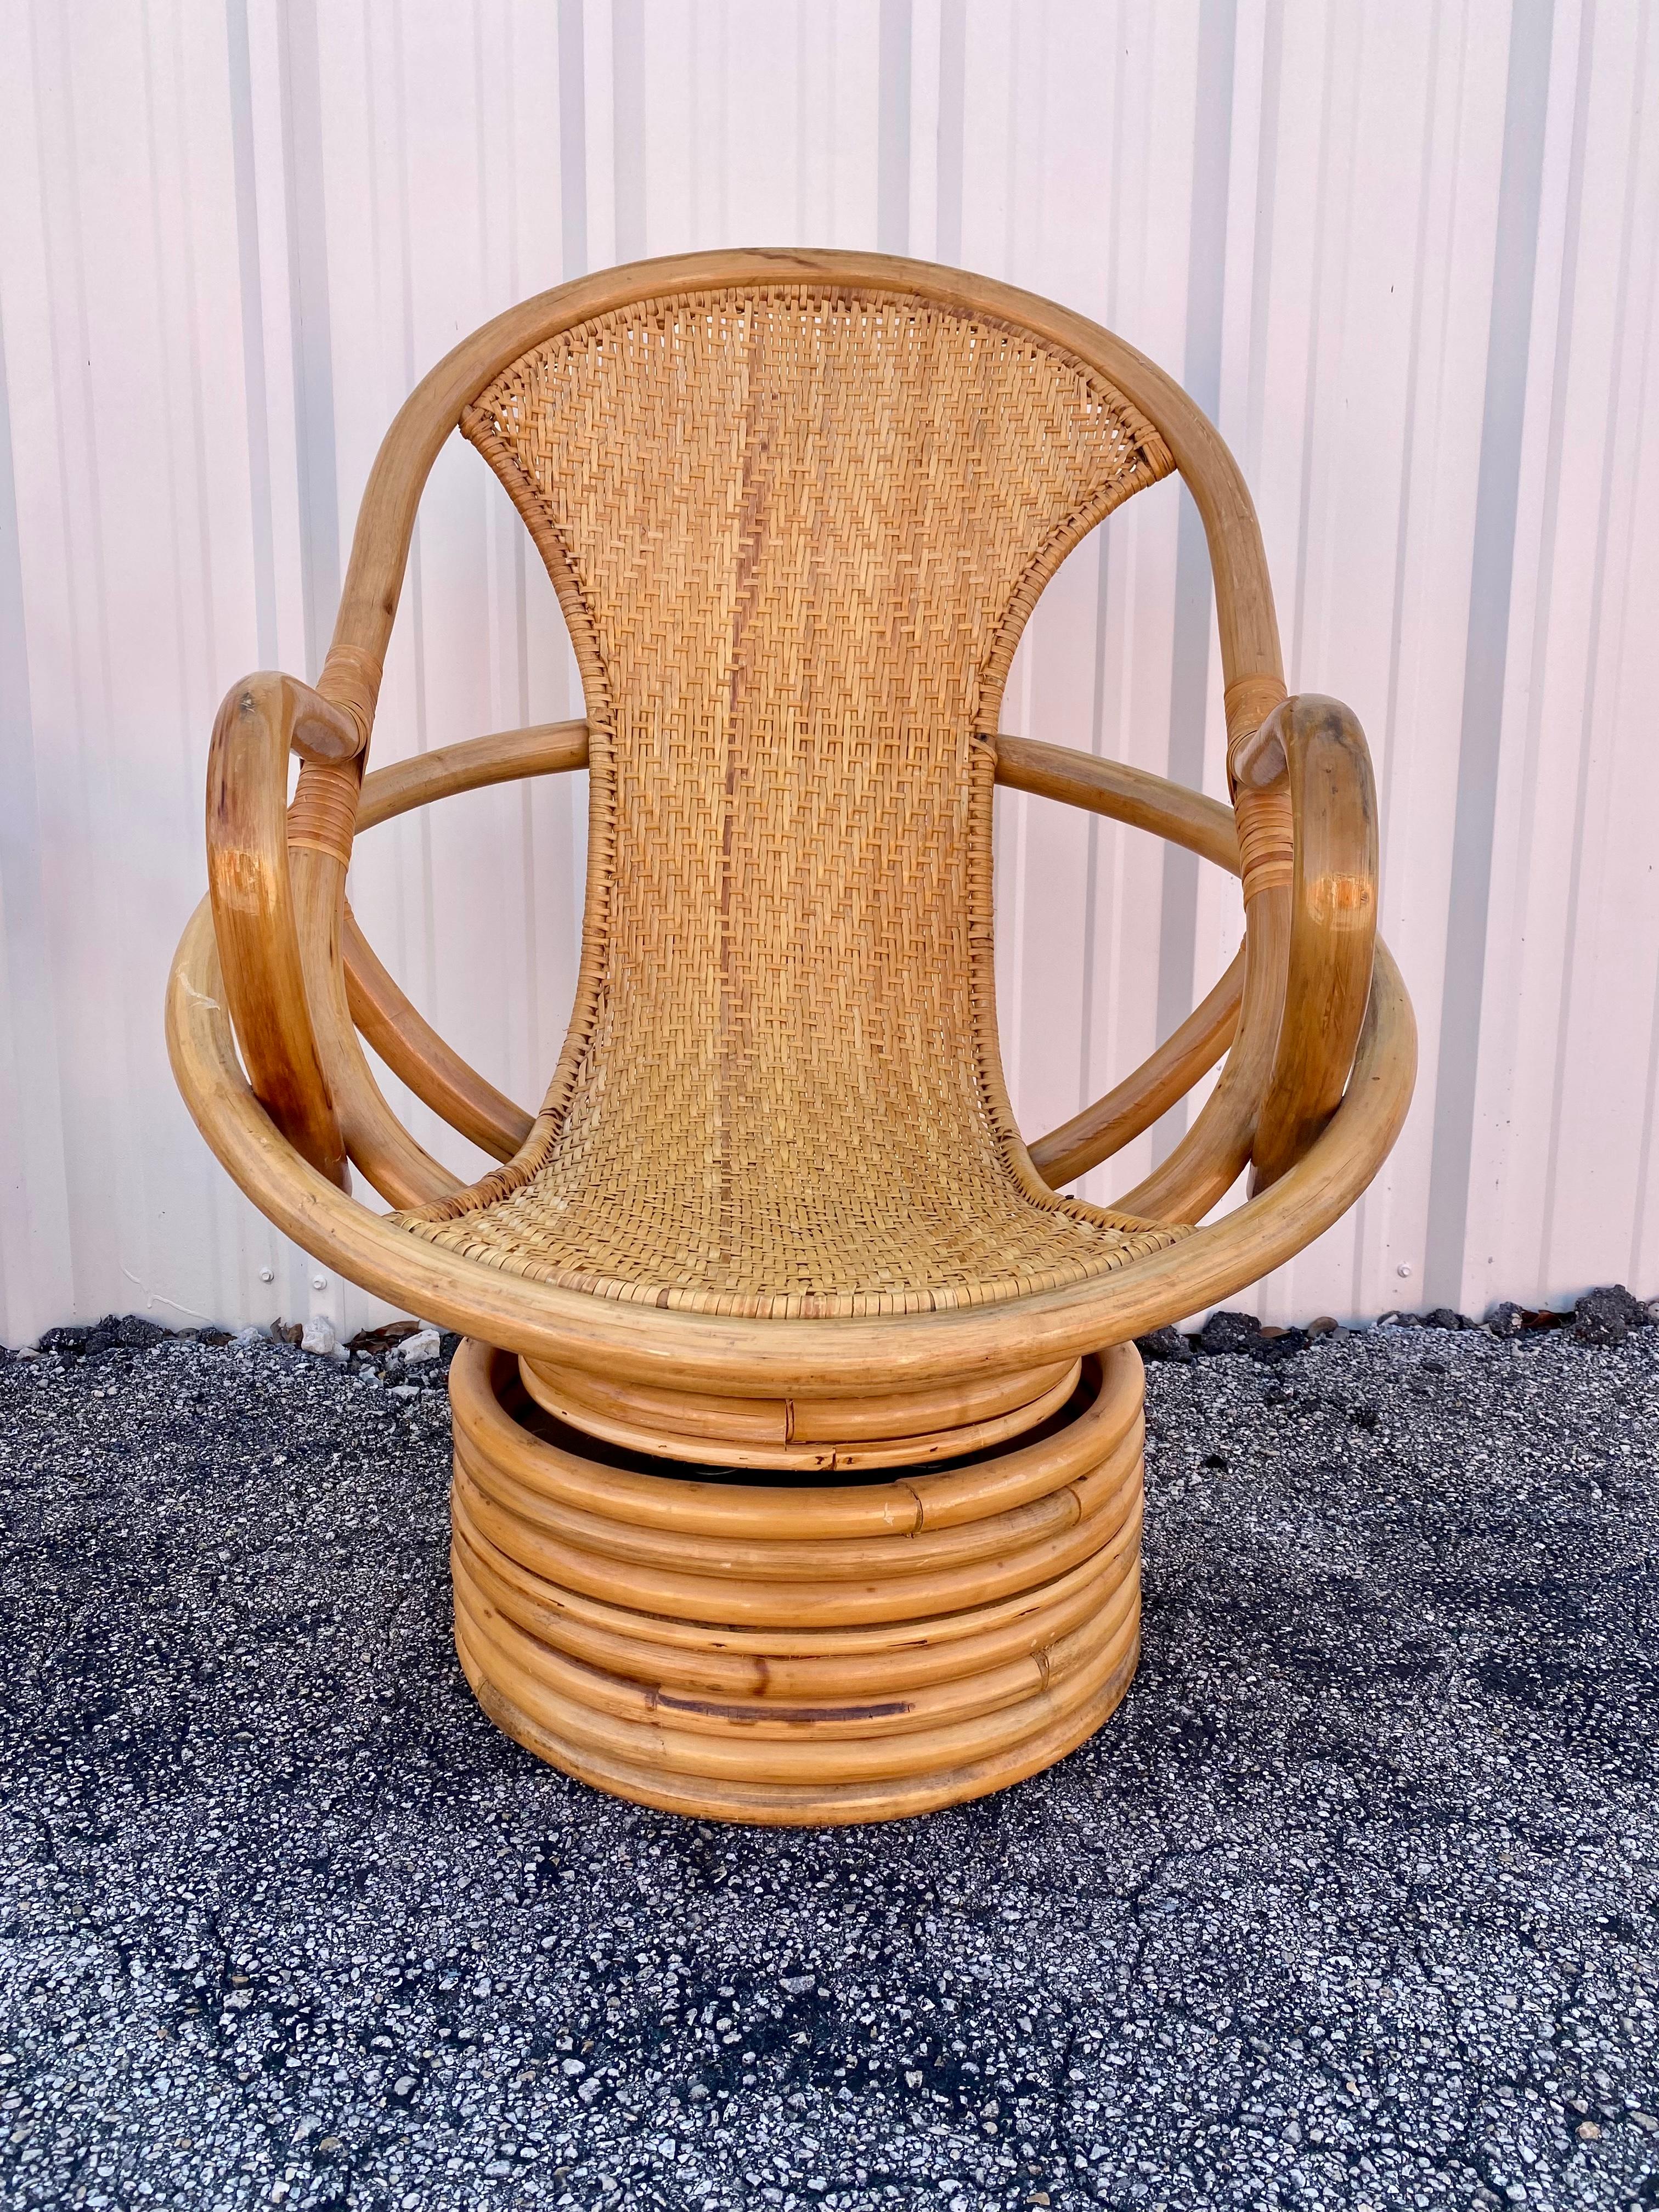 1980s Rattan Coastal Sculptural Swivel Chairs, set of 2 For Sale 2